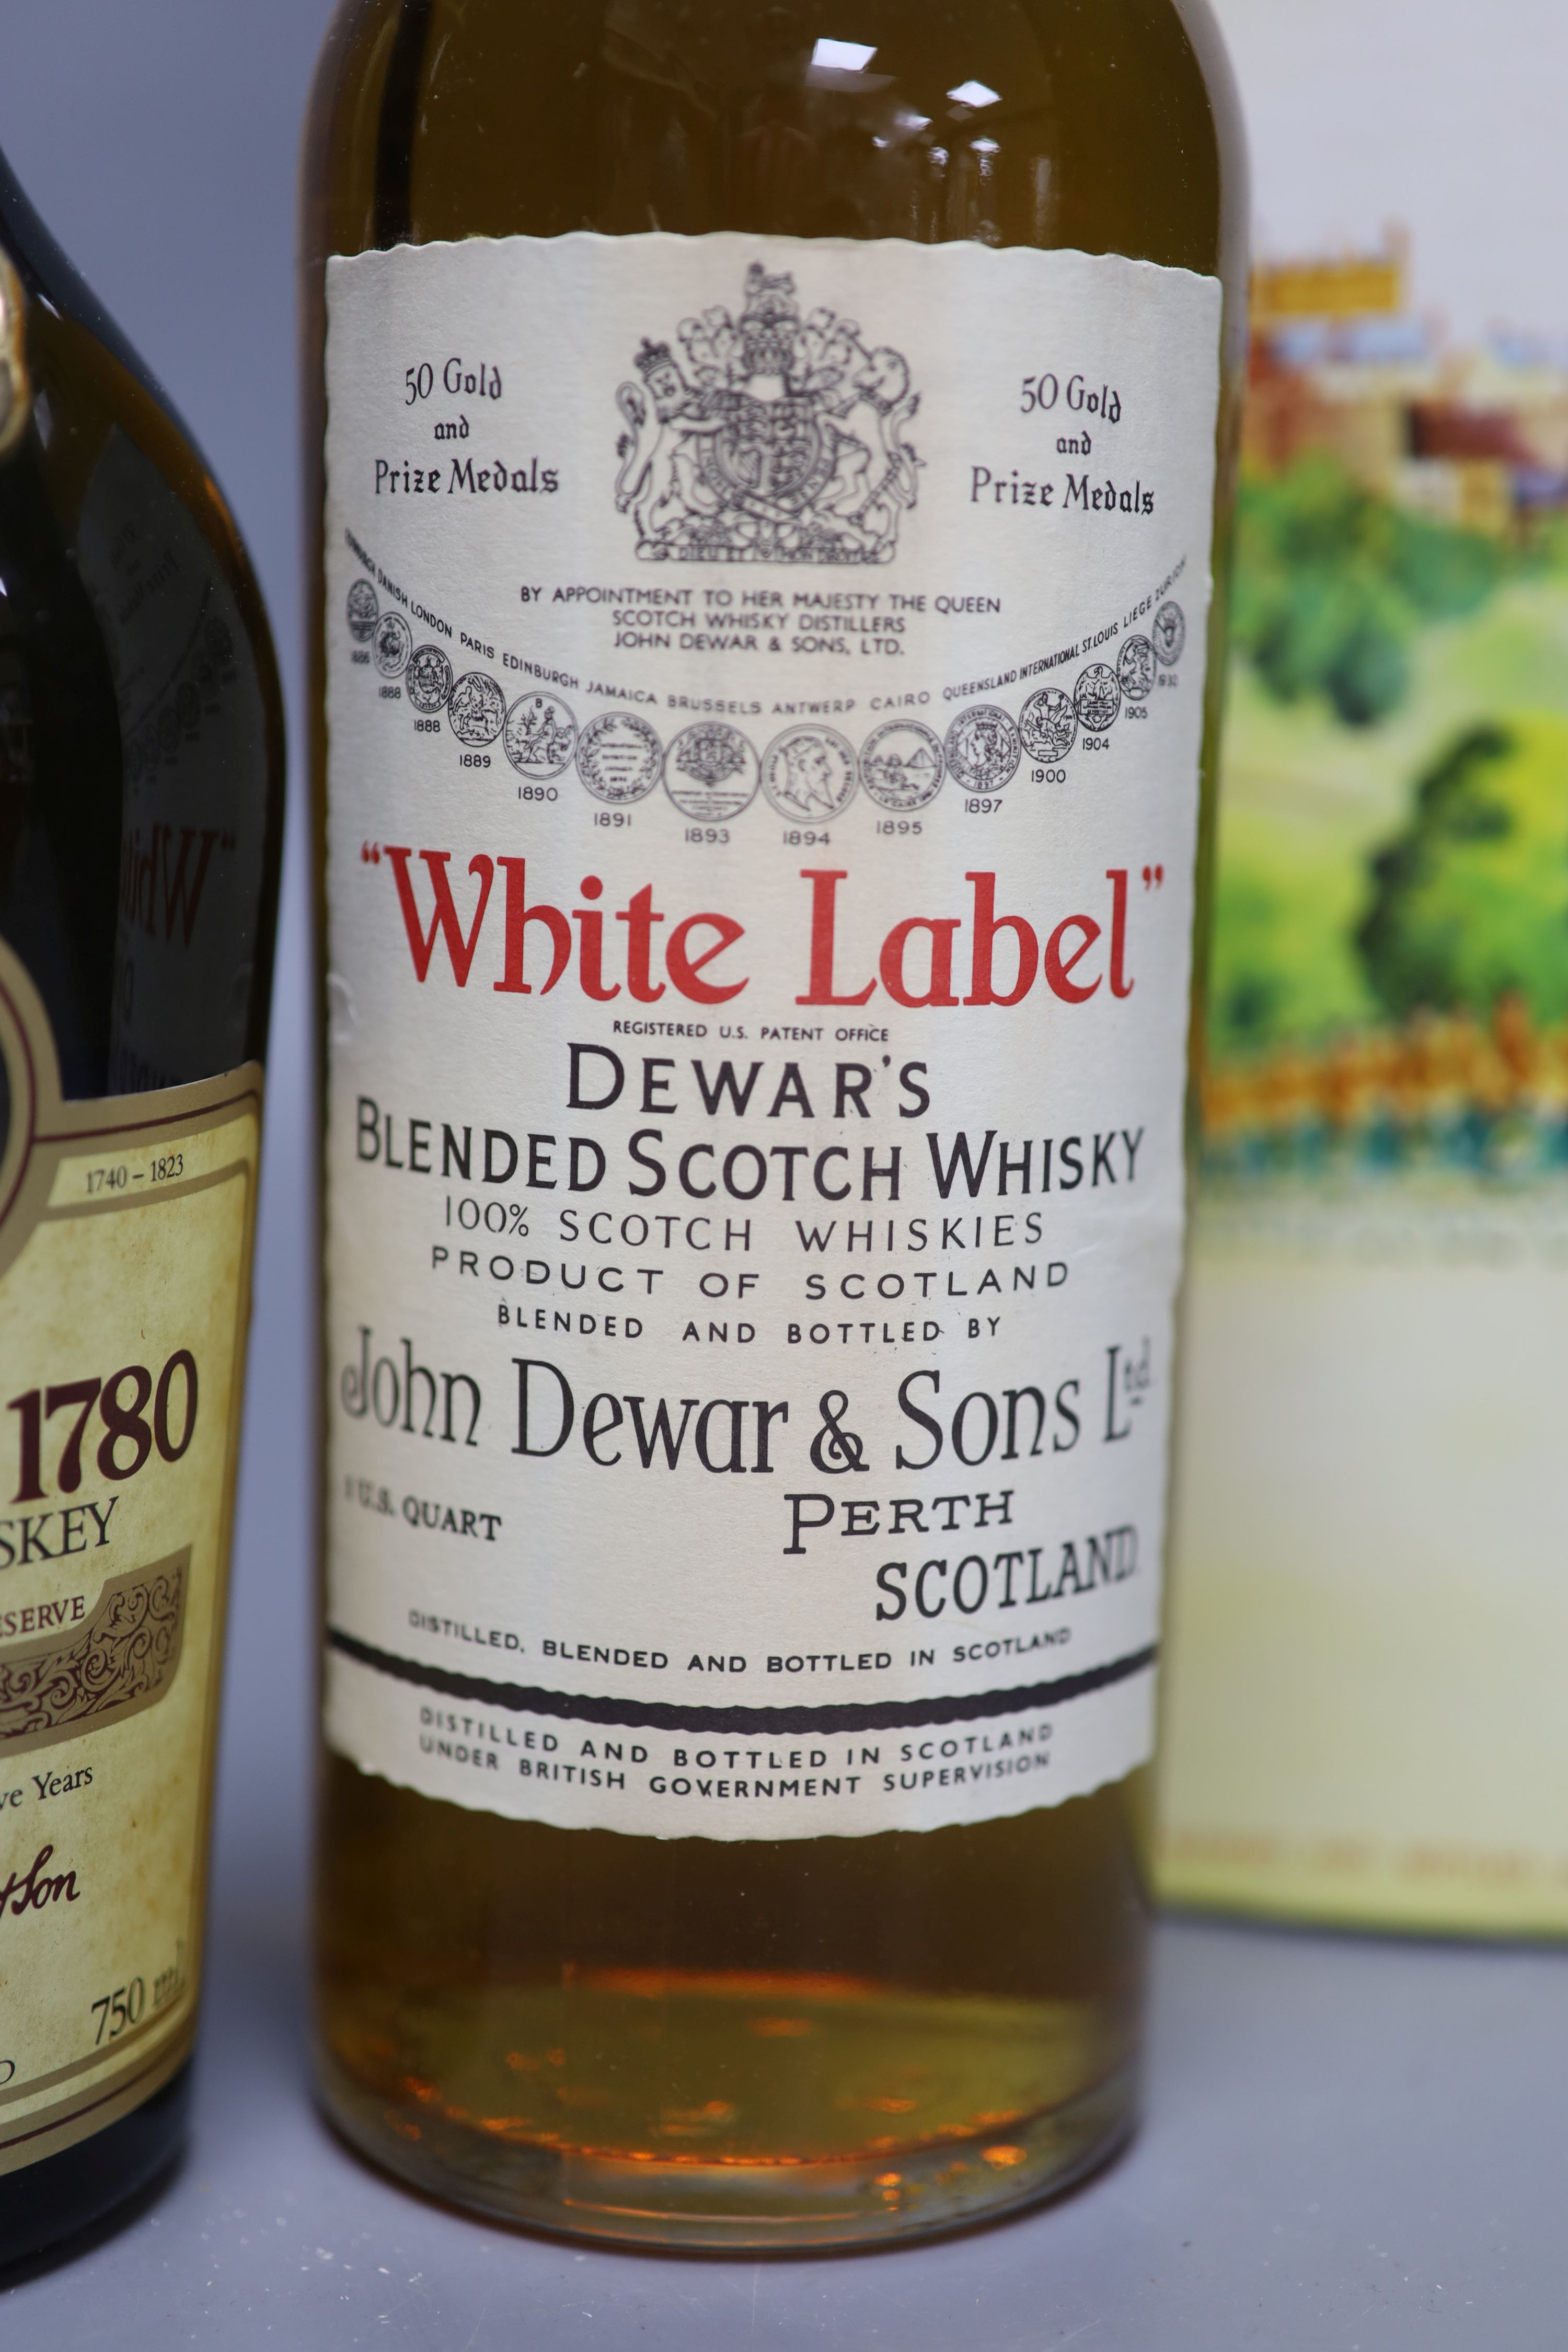 A bottle of Jamieson 1780 Old Irish Whiskey, aged 12 years, together with White Label Dewars - Image 3 of 3